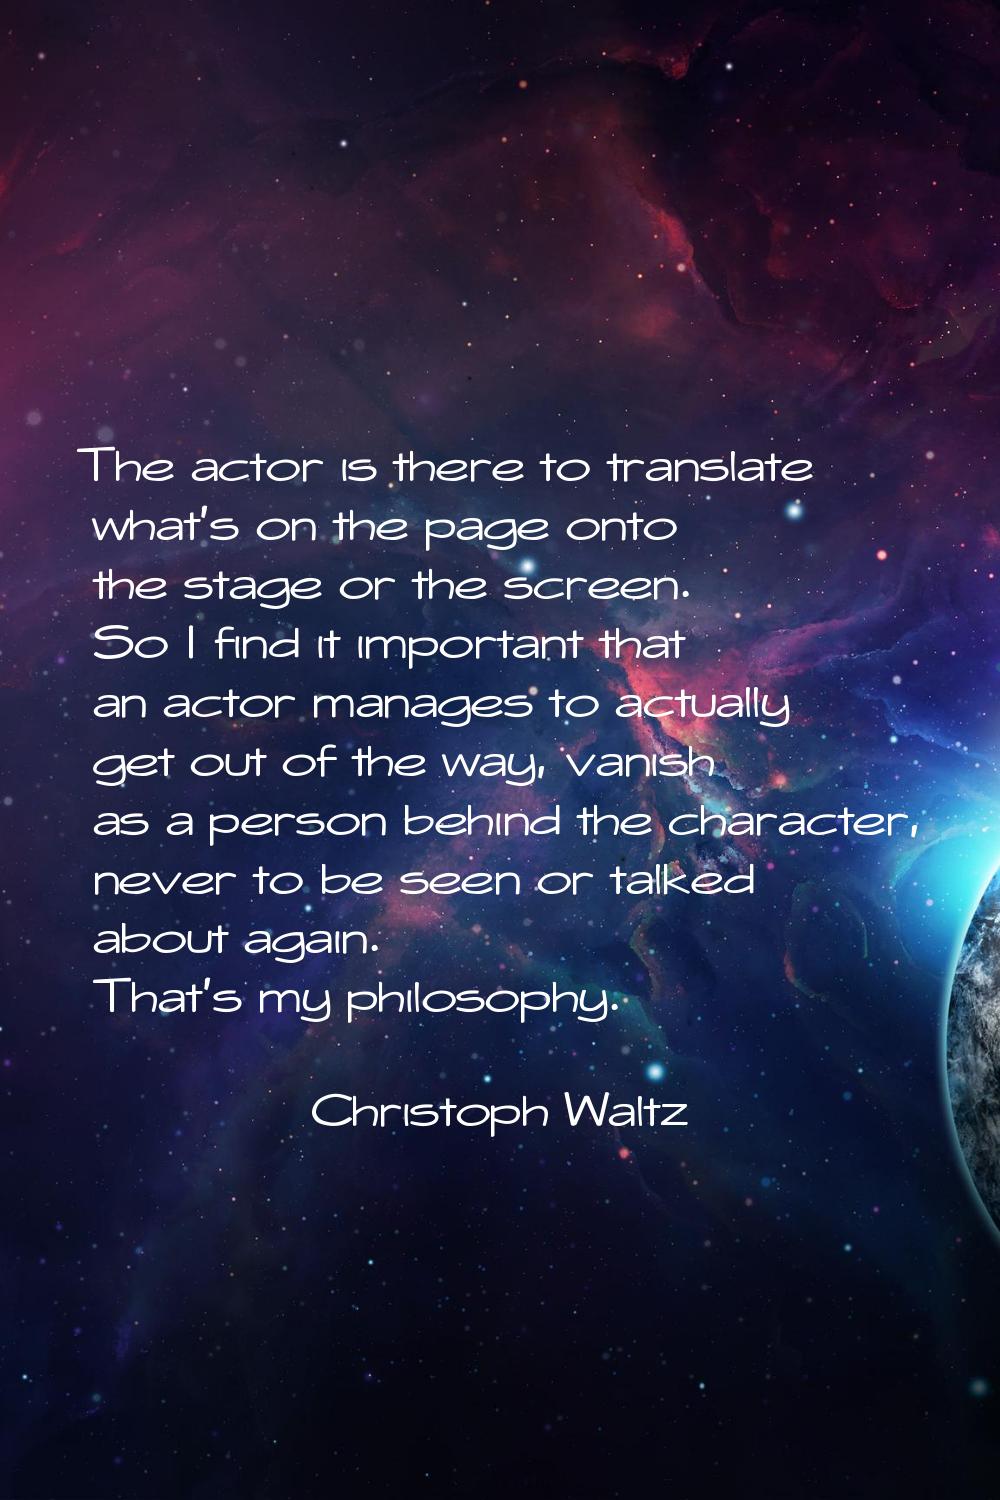 The actor is there to translate what's on the page onto the stage or the screen. So I find it impor